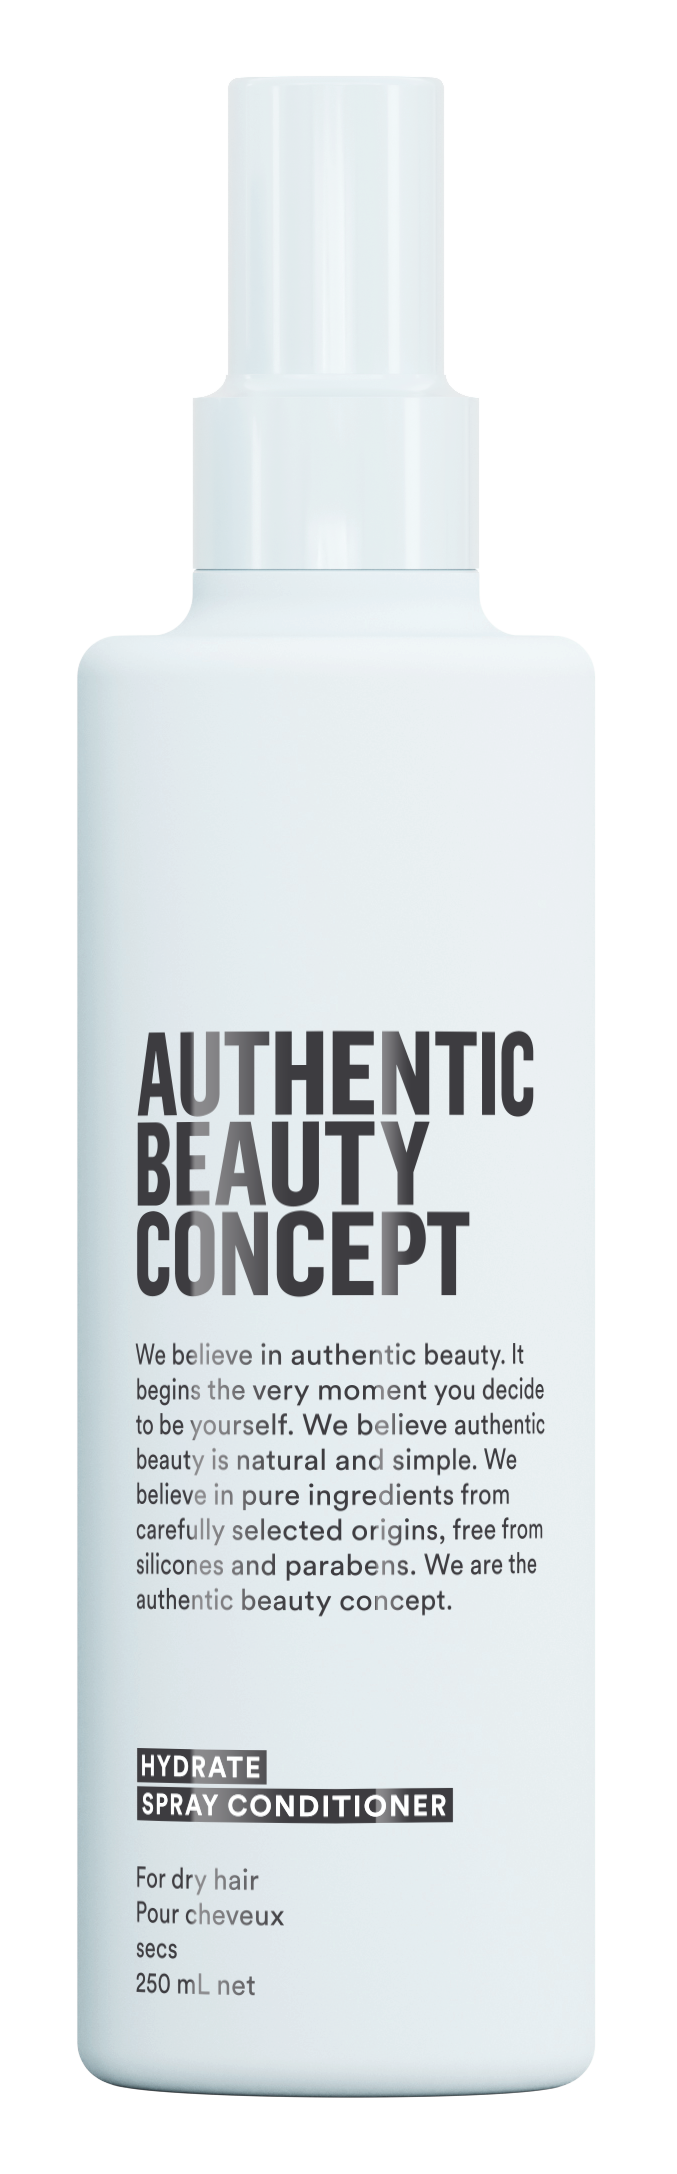 Authentic Beauty Concept - Hydrate Spray Conditioner 250ml